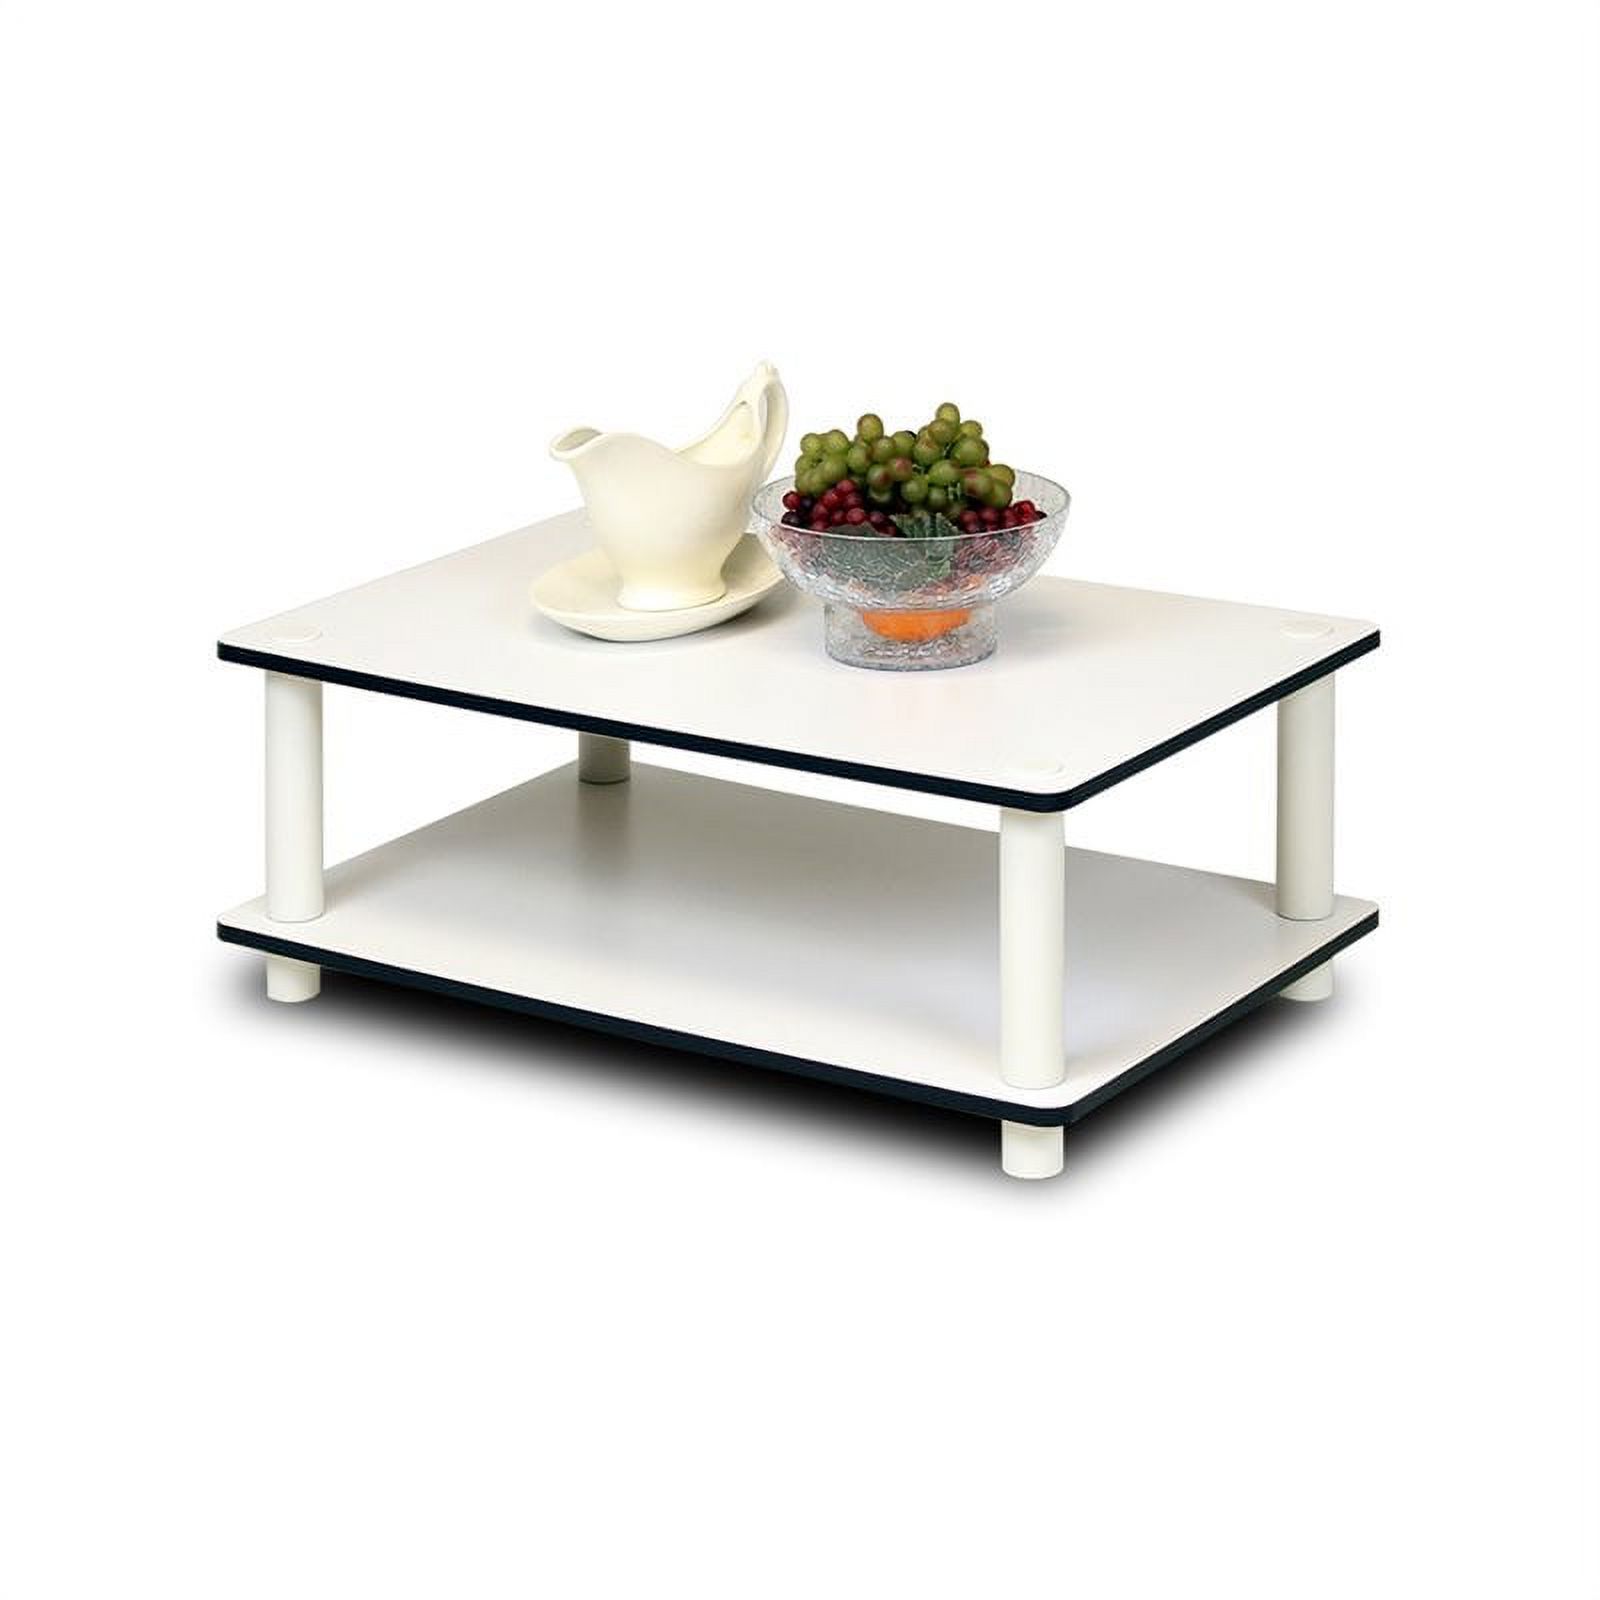 Furinno 11172 Just 2-Tier No-Tools Coffee Table, White - image 4 of 5